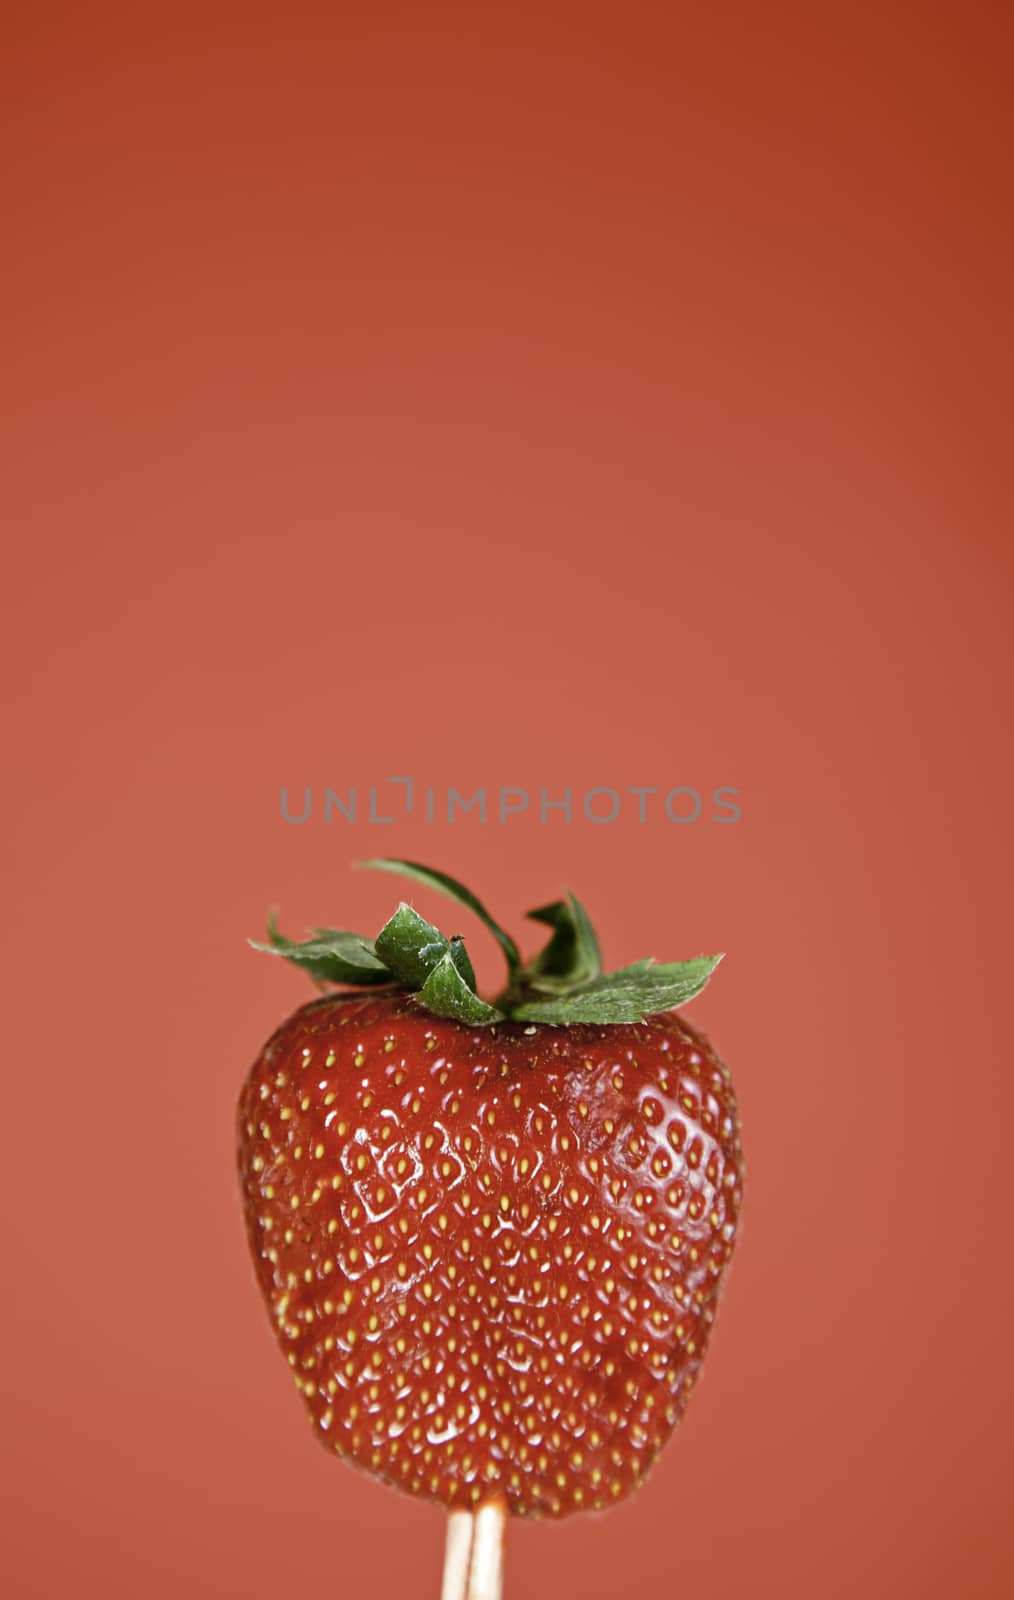 Strawberries on red background, detail of a sweet and juicy strawberry, food healthy life, diet,